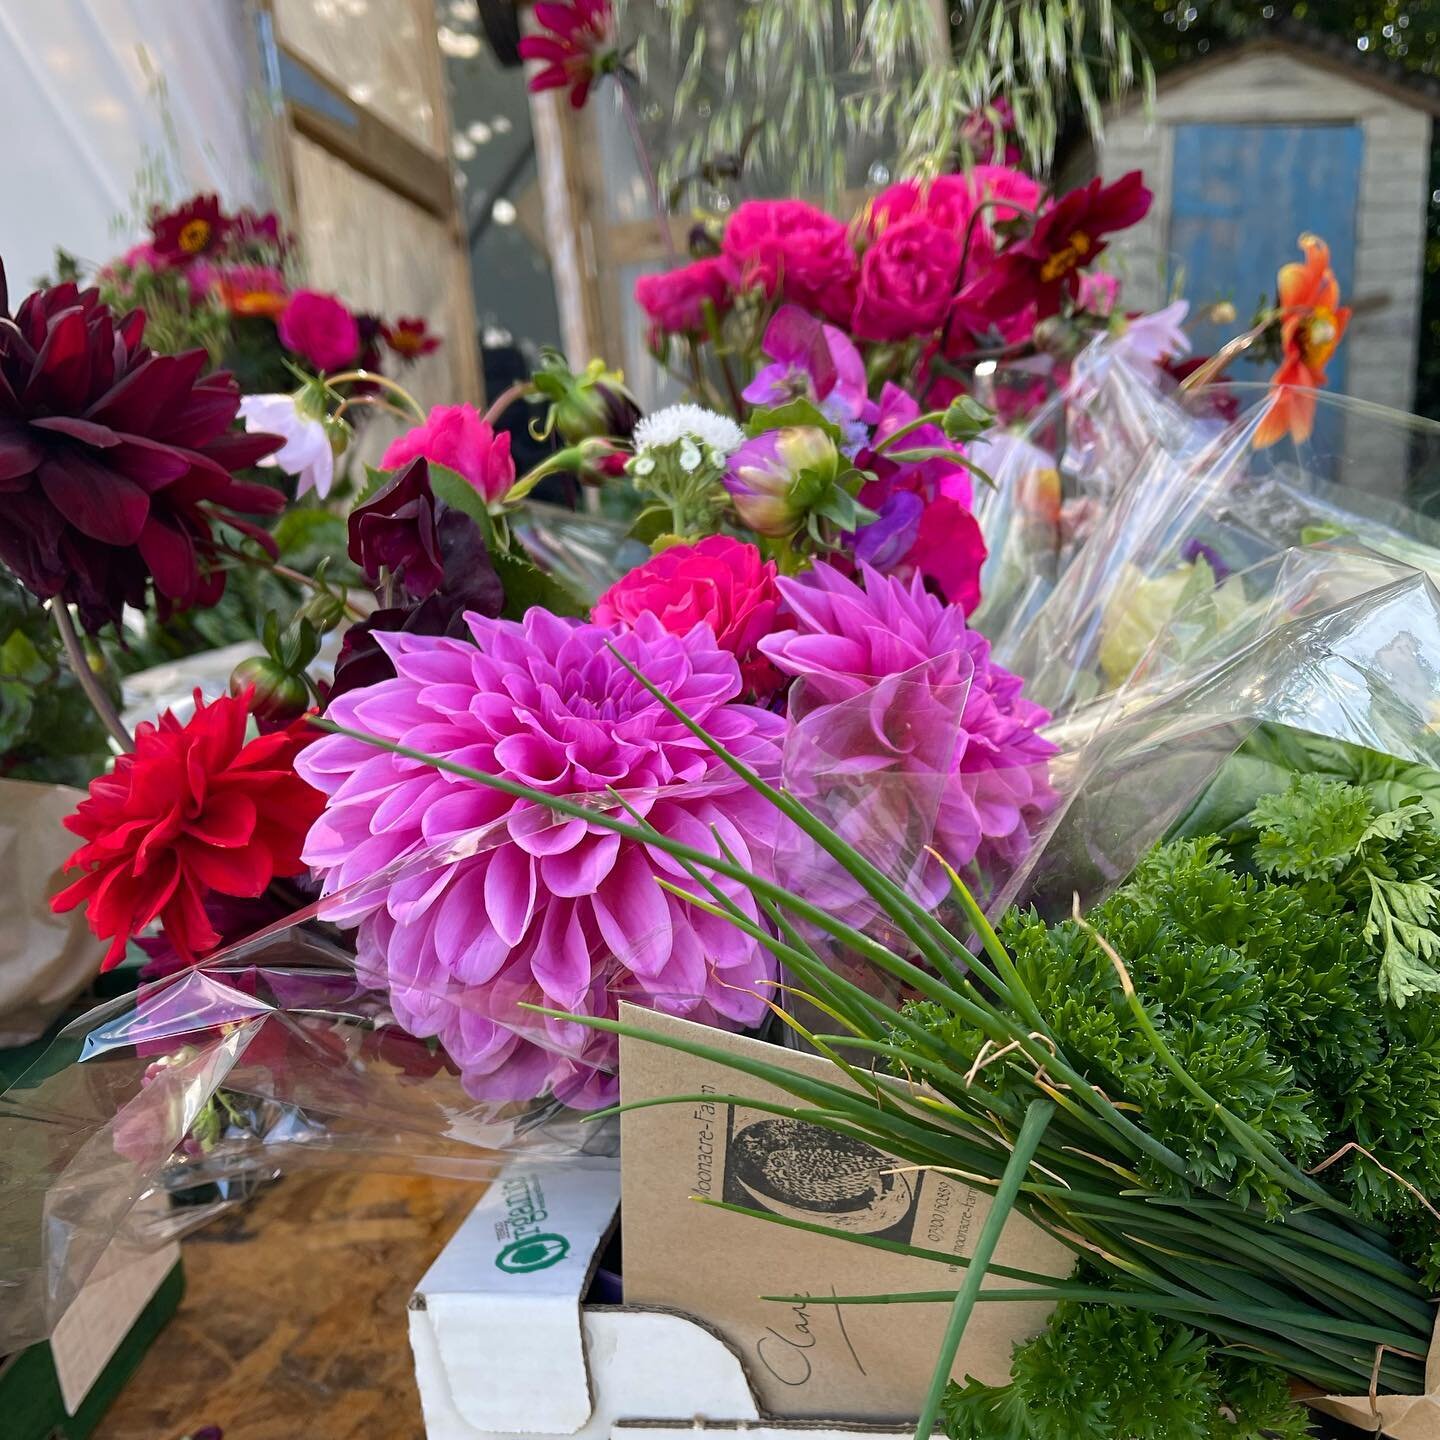 Durslade Farm Shop are now stocking Moonacre Veg Boxes! For those in the Bruton area this is a fantastic opportunity to pick up your box closer to home! The @dursladefarmshop gang popped over to the farm the other day to catch up with Dide and have w